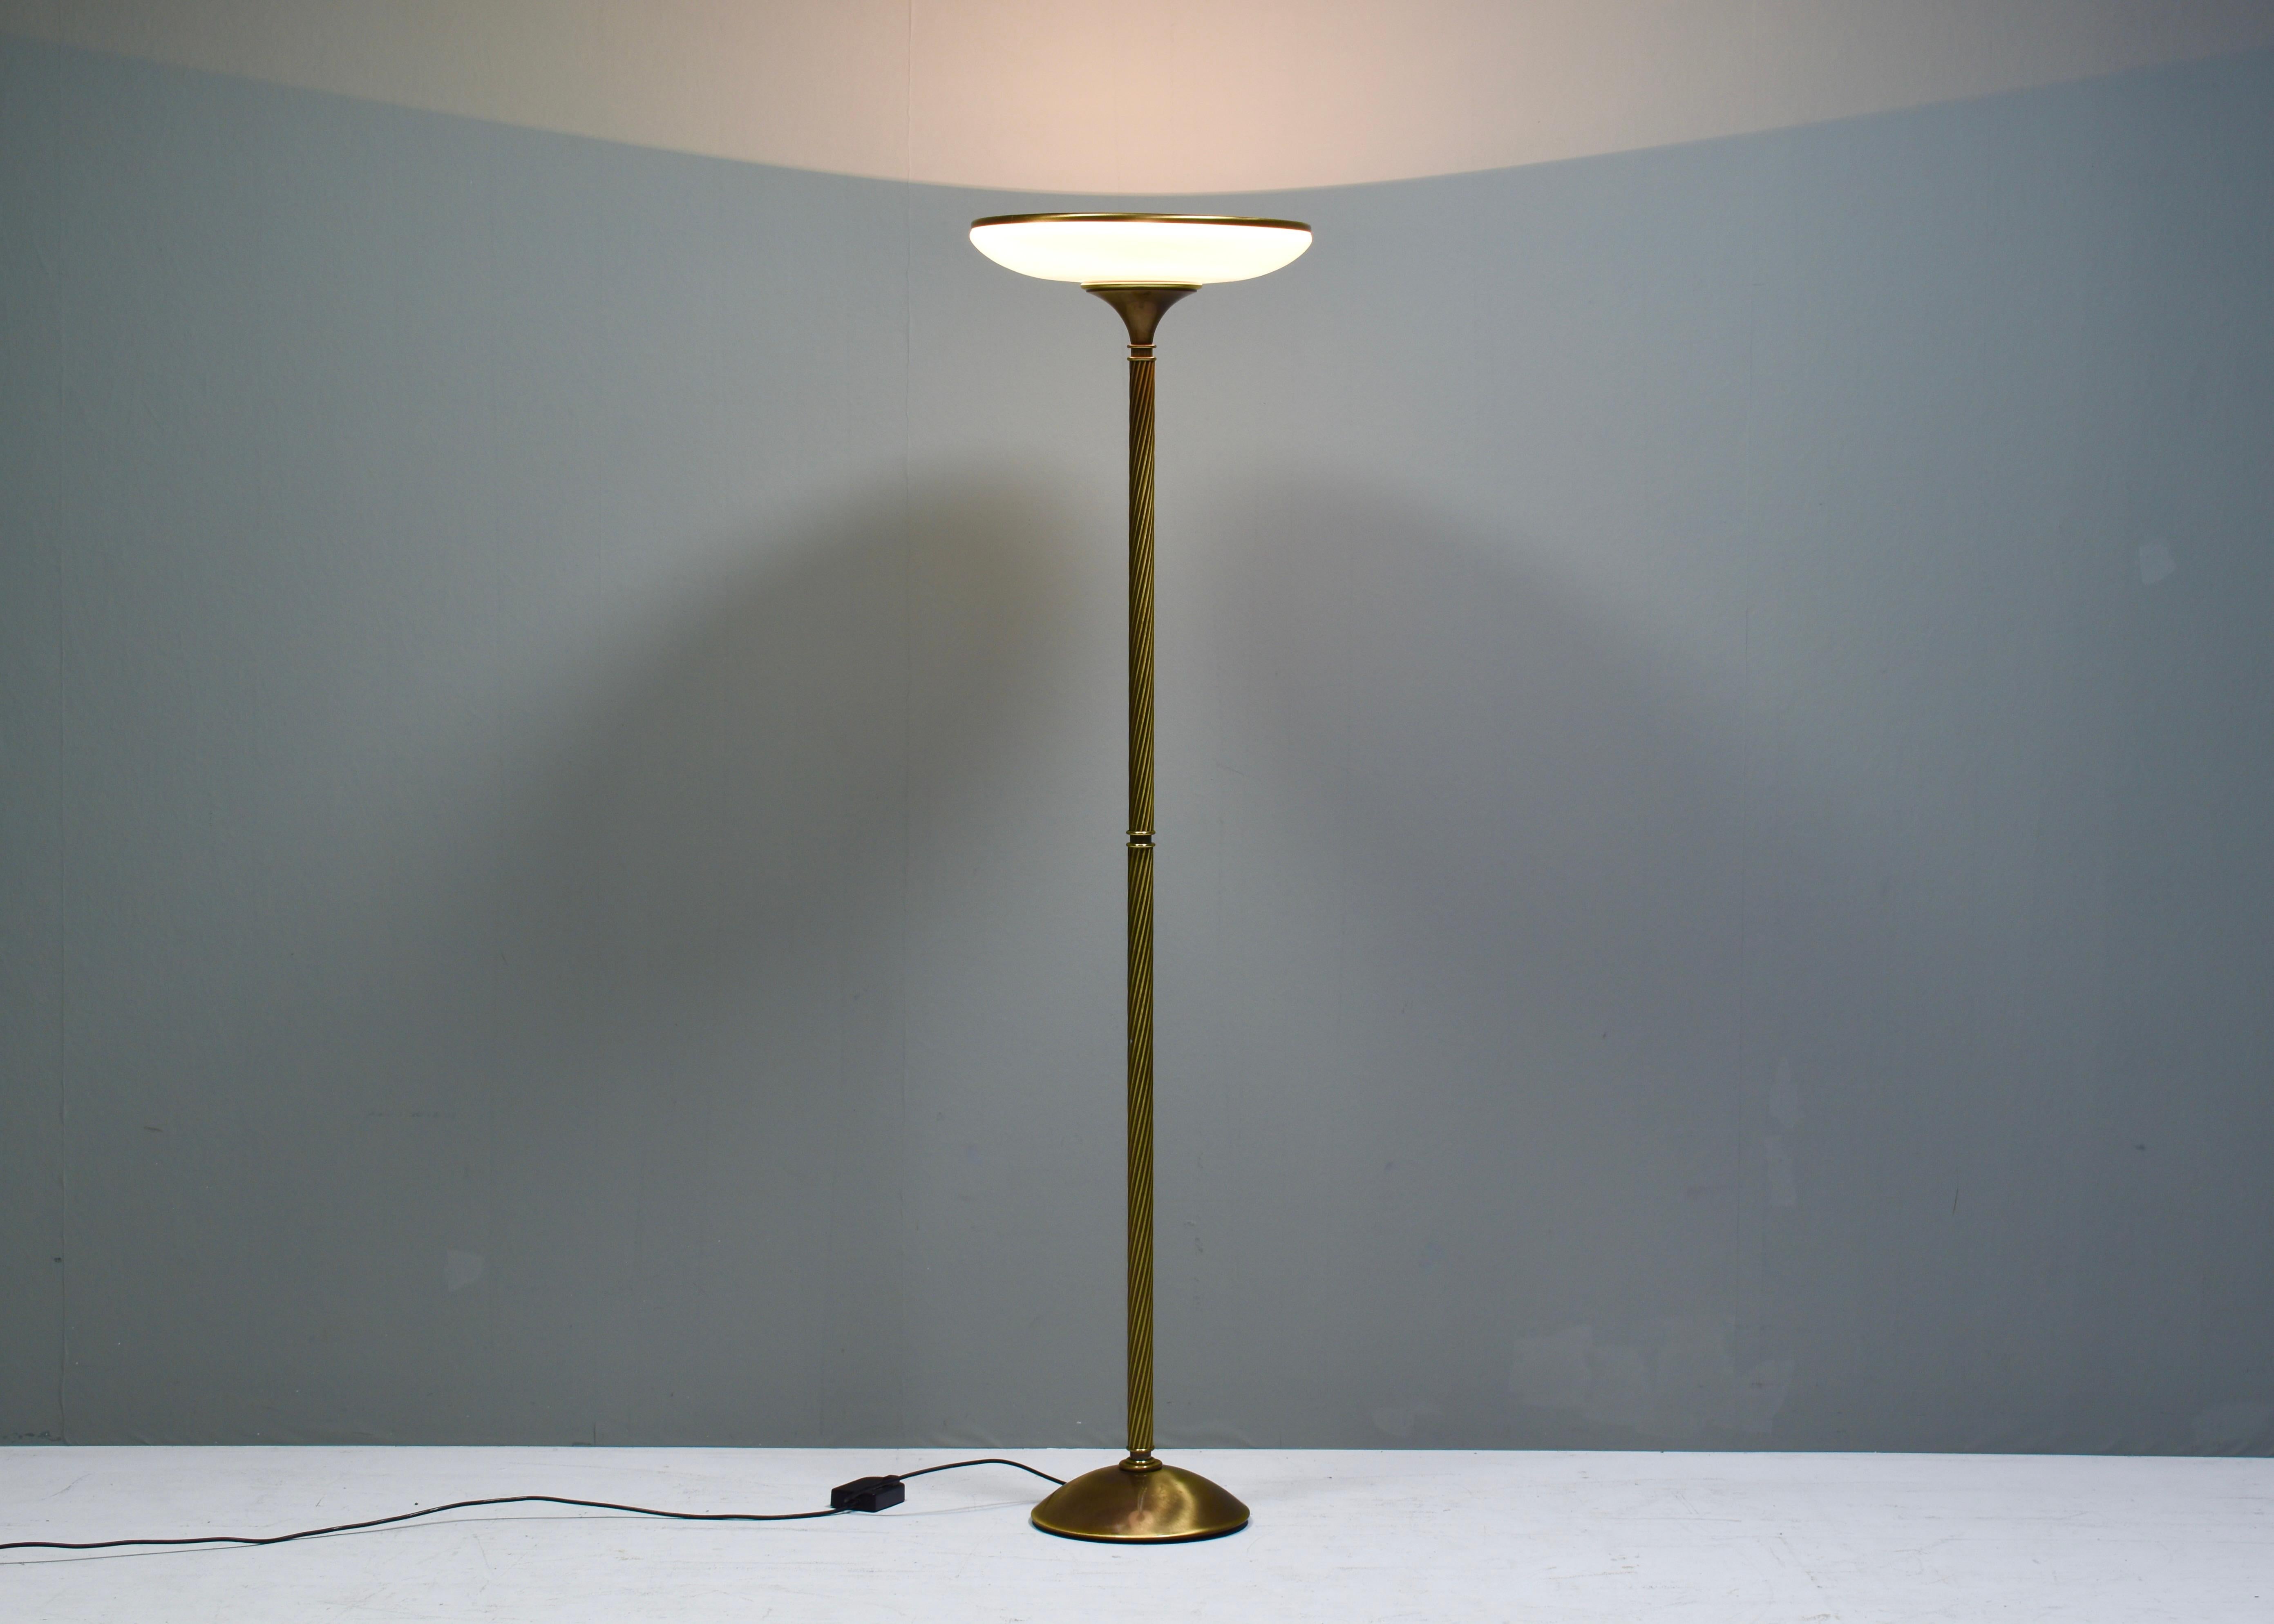 Elegant RELCO MILANO turned brass and opaline glass floor lamp - circa 1970.
Designer: Unknown
Manufacturer: Relco Milano
Country: Italy
Model: Floor lamp
Design period: circa 1980
Date of manufacturing: circa 1980
Size: 45ø x 175 cm.
Material: